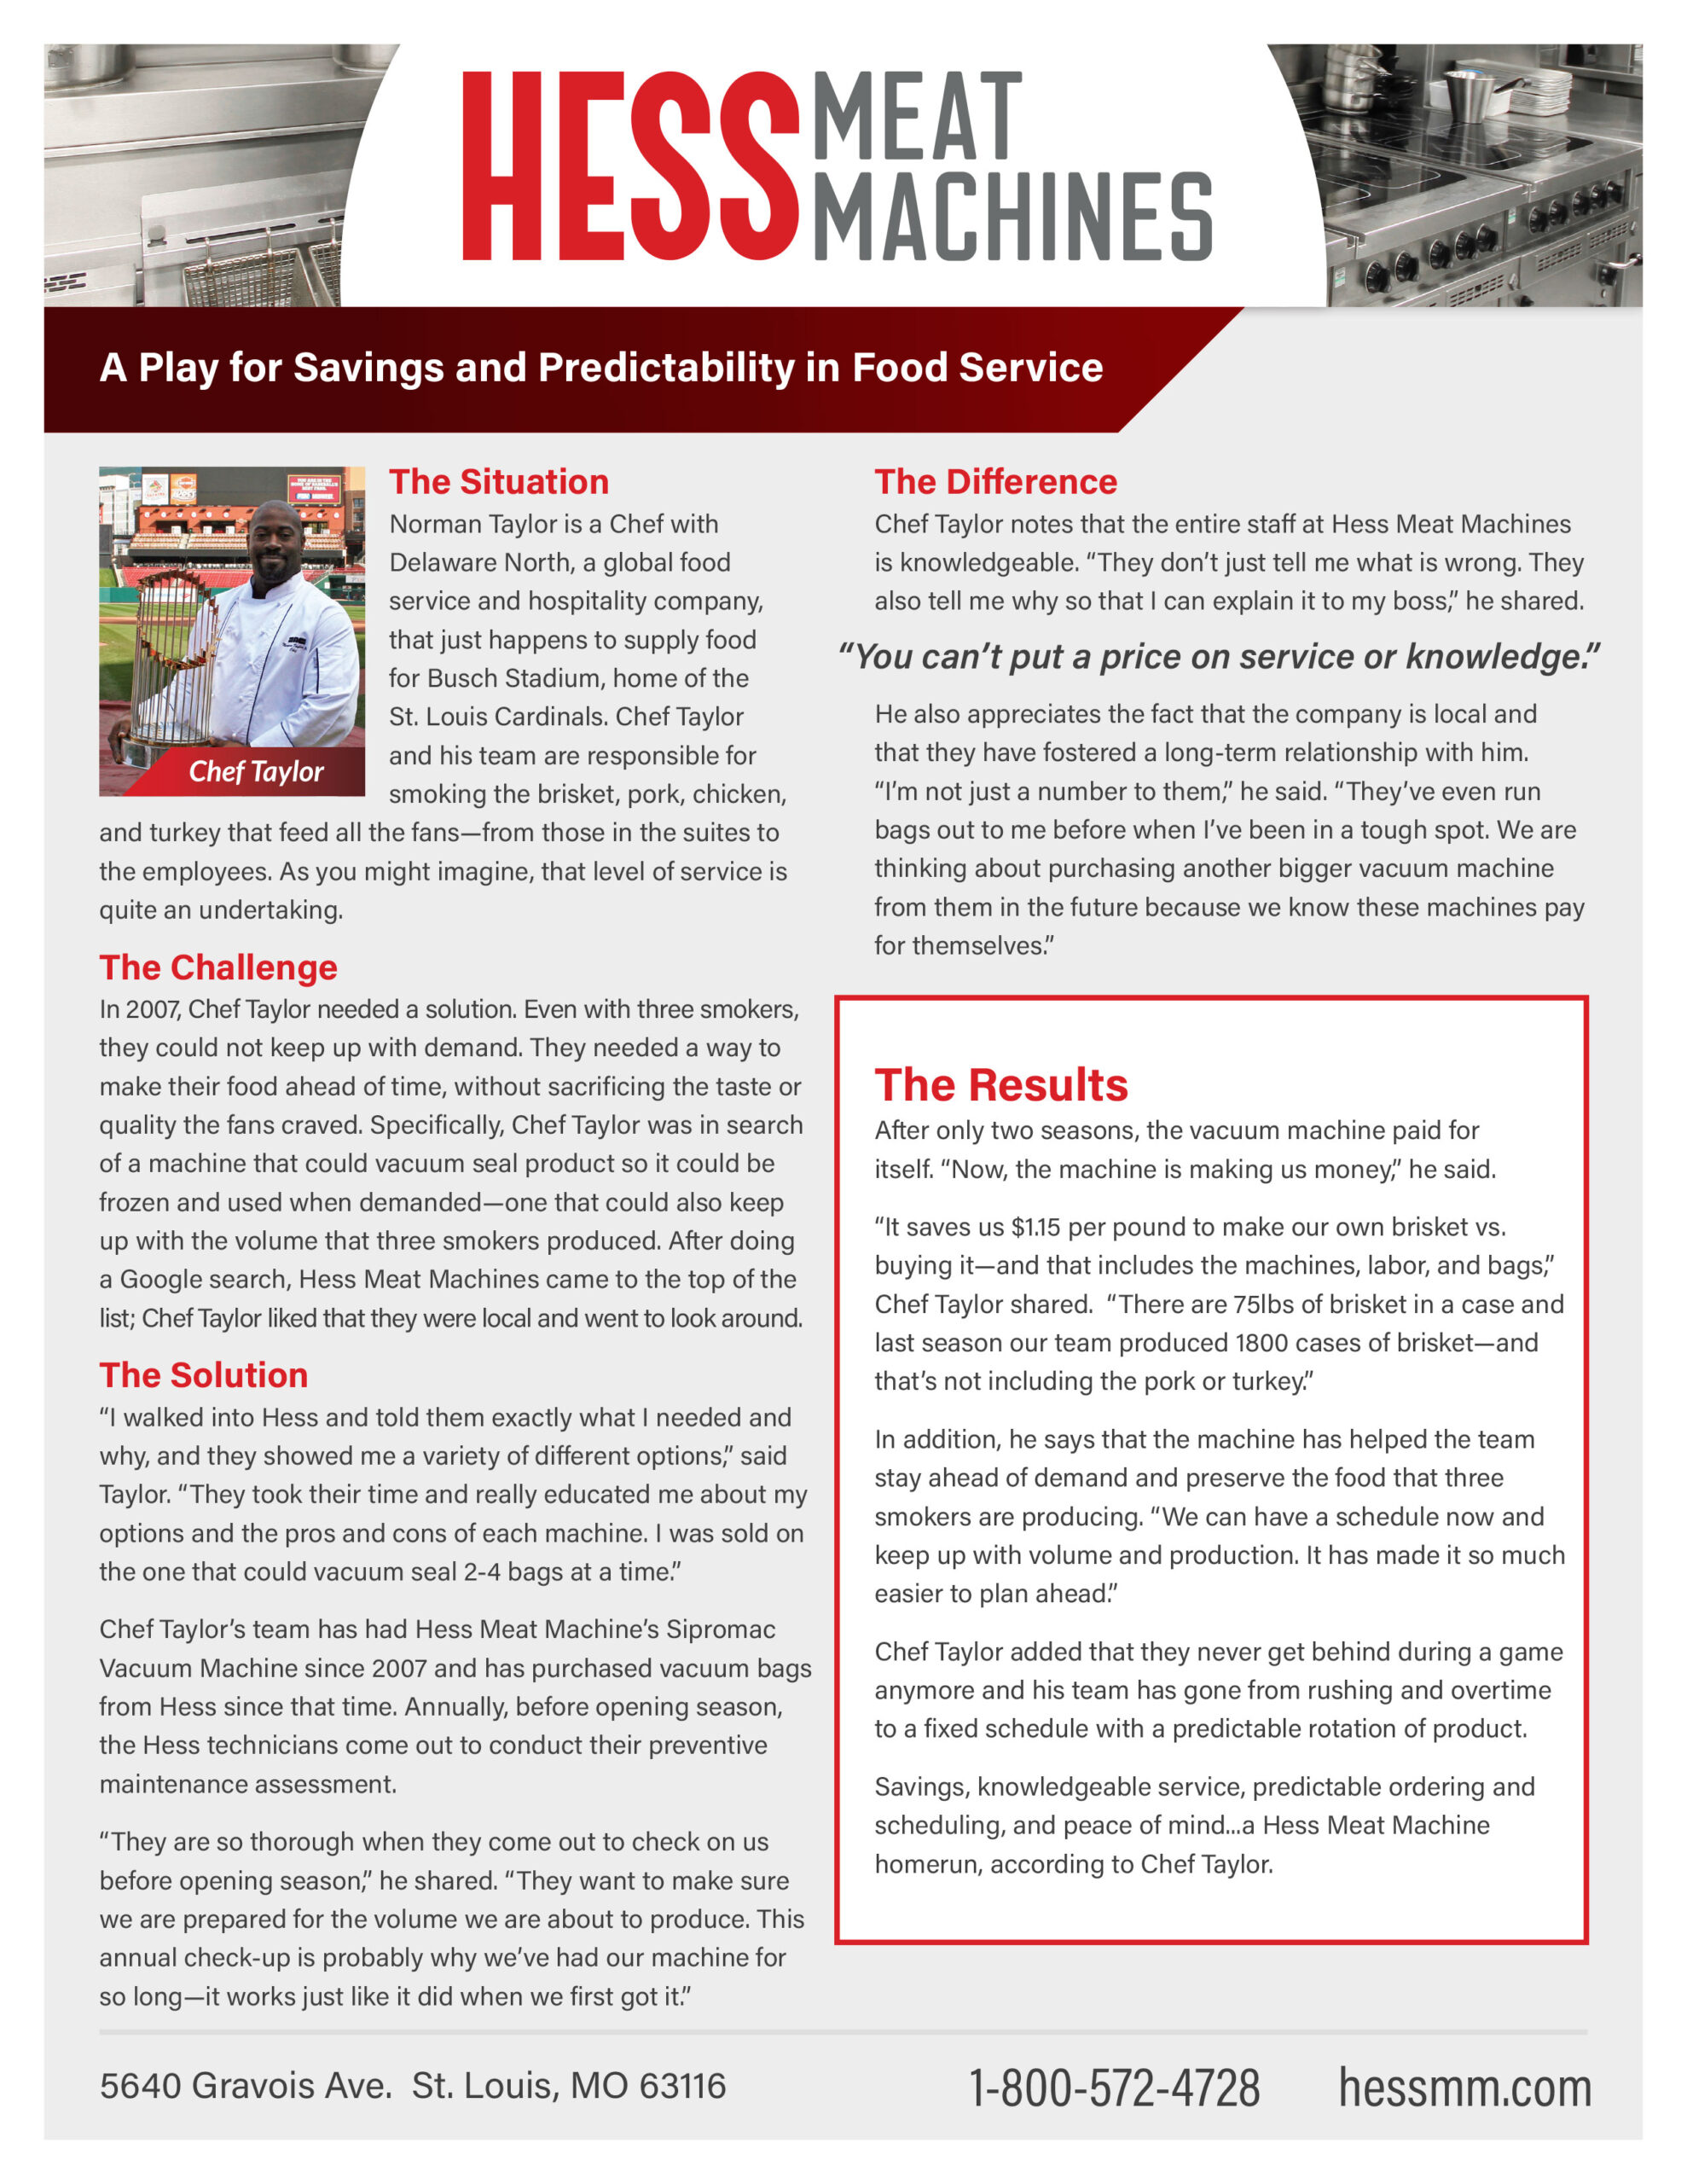 Hess Meat Machines Food Service Industry Case Study